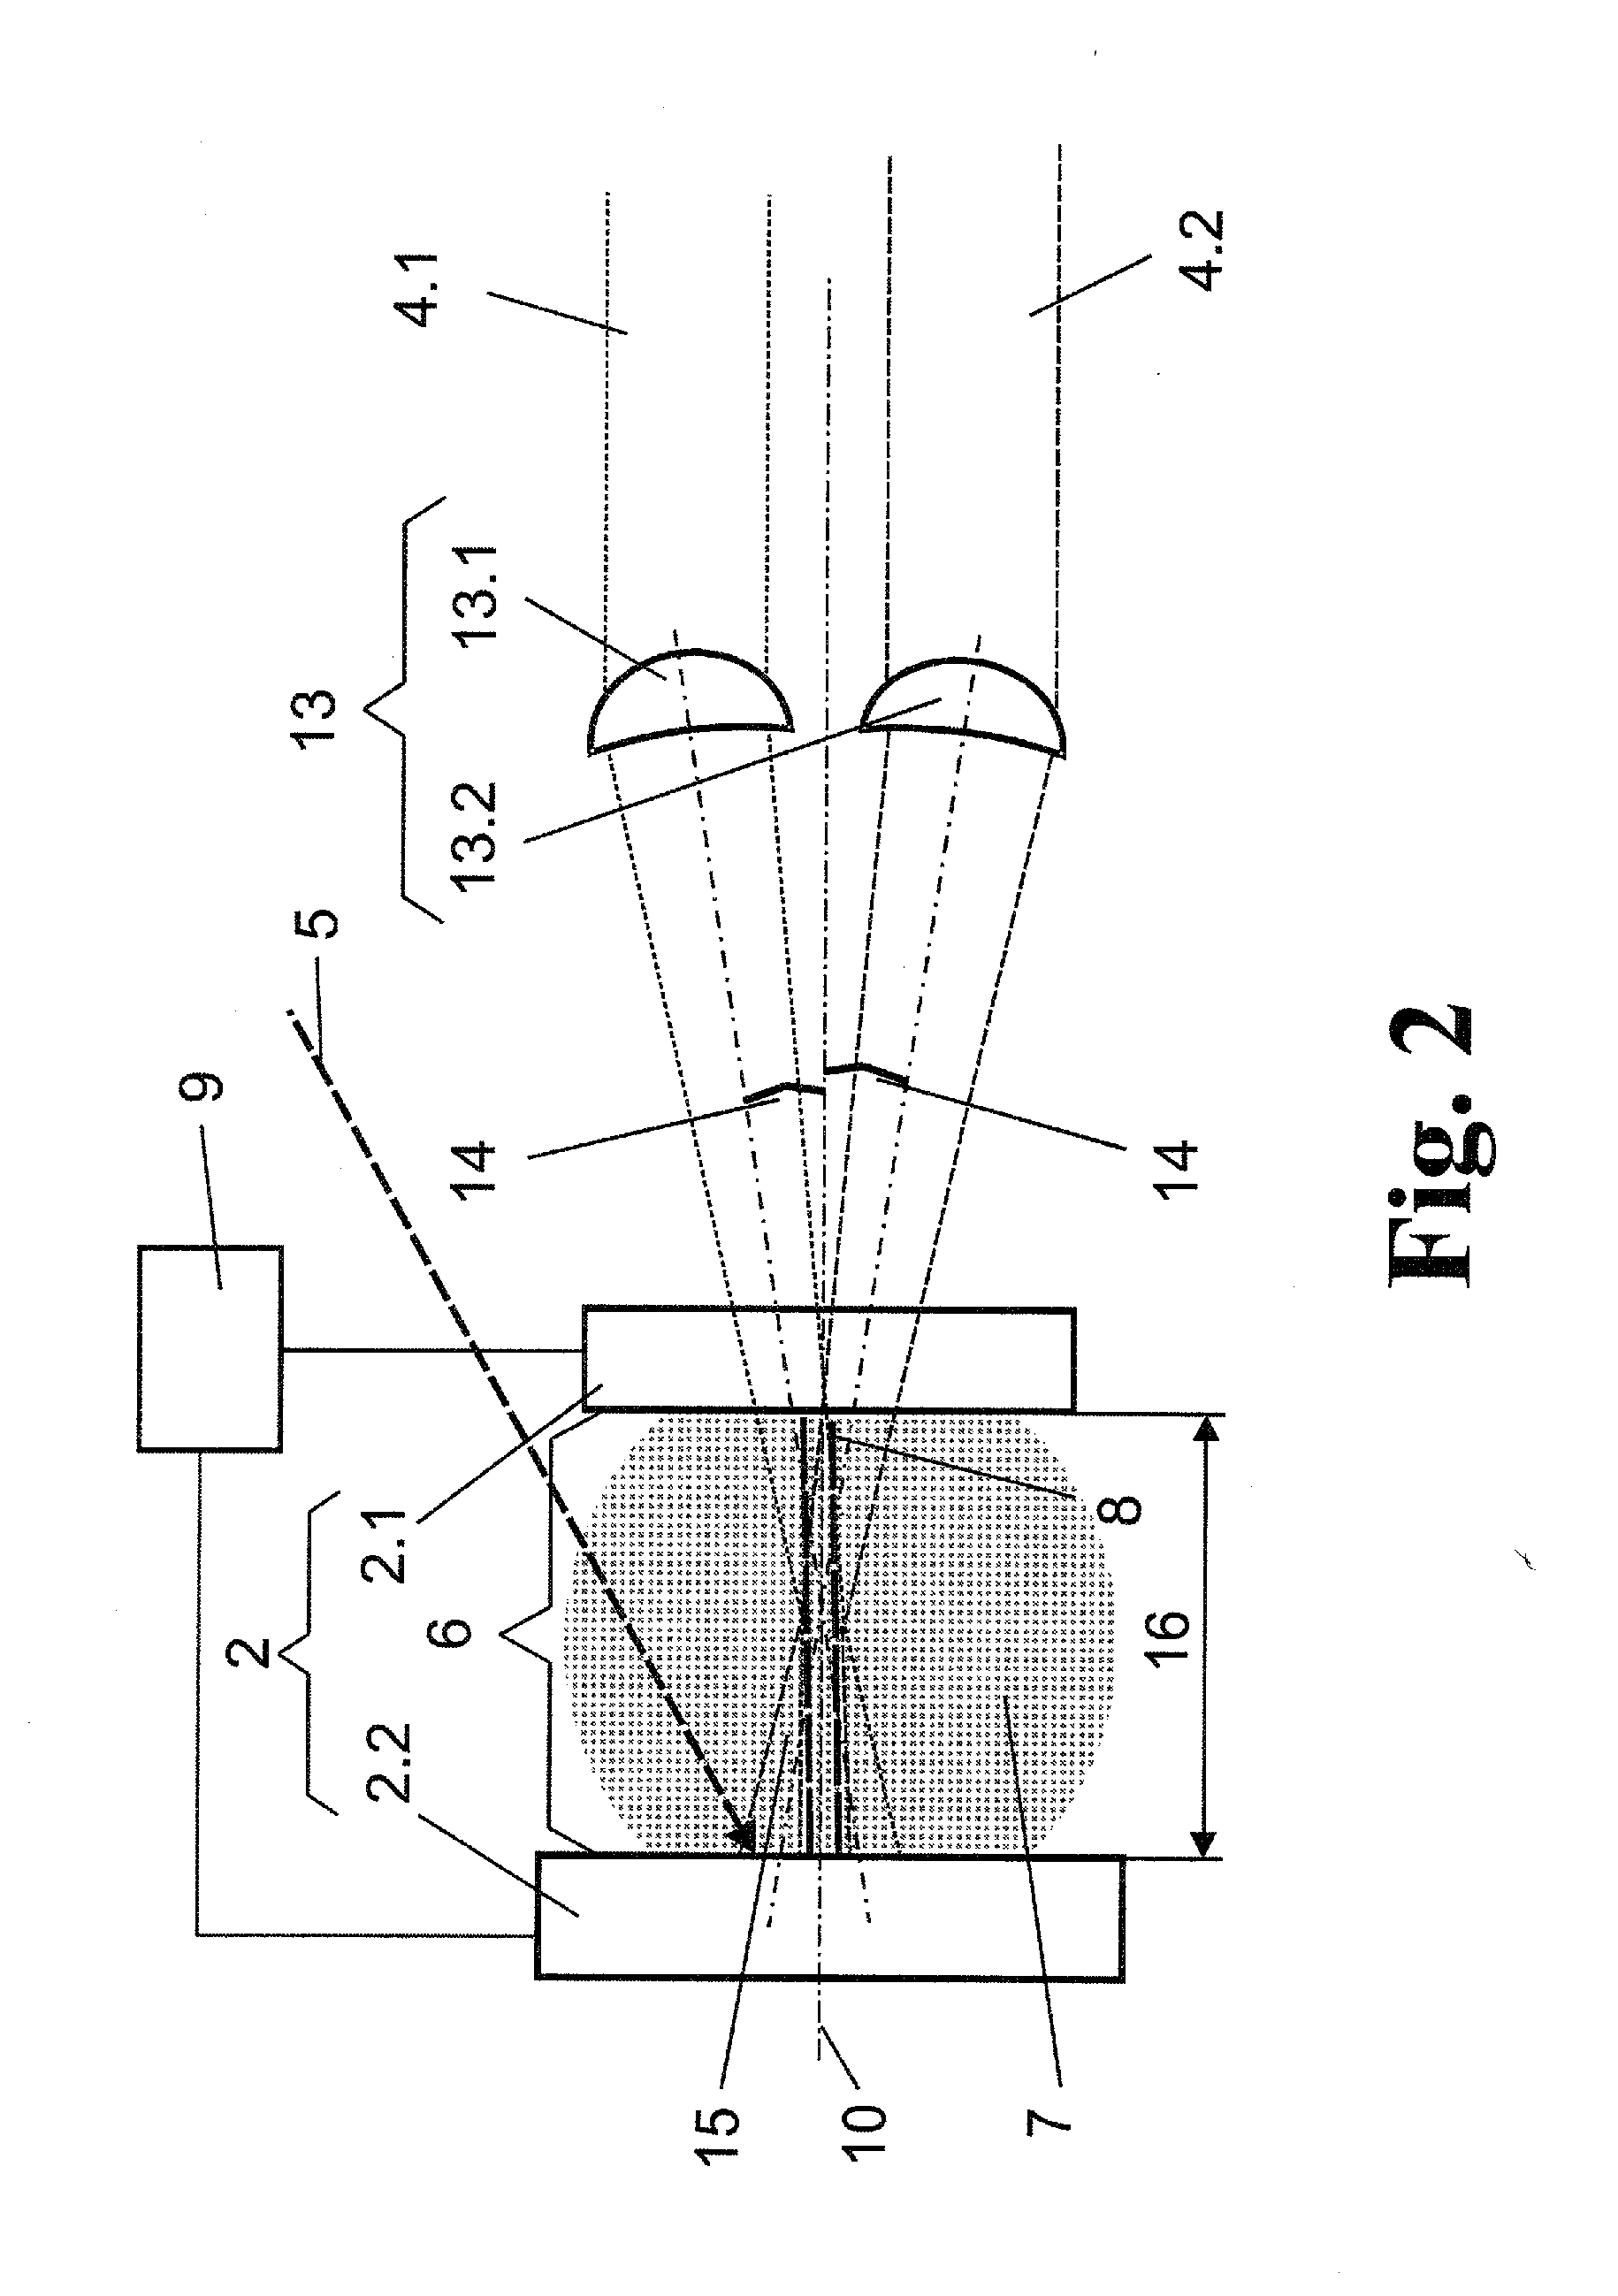 Method and Apparatus for the Generation of EUV Radiation from a Gas Discharge Plasma